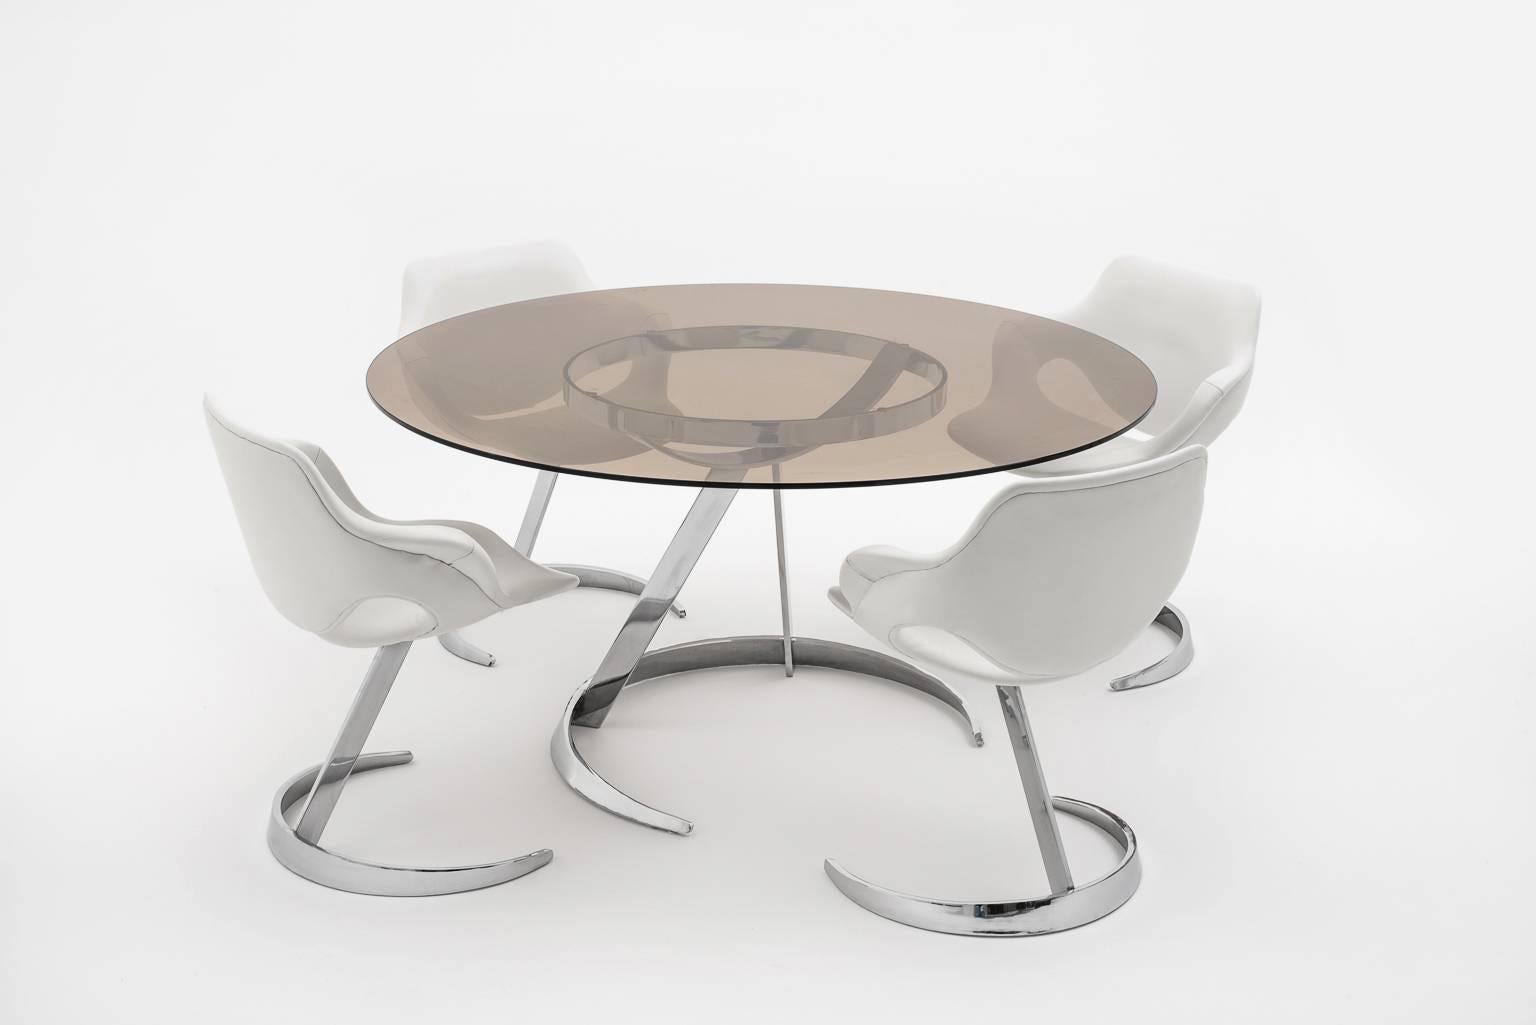 Exclusive table and chairs by Boris Tabacoff for Mobilier Modulaire Moderne, France, 1960s. High and heavy quality chromed solid steel. The chairs are upholstered with the original vinyl which is in perfect condition, the table has a chic smoked